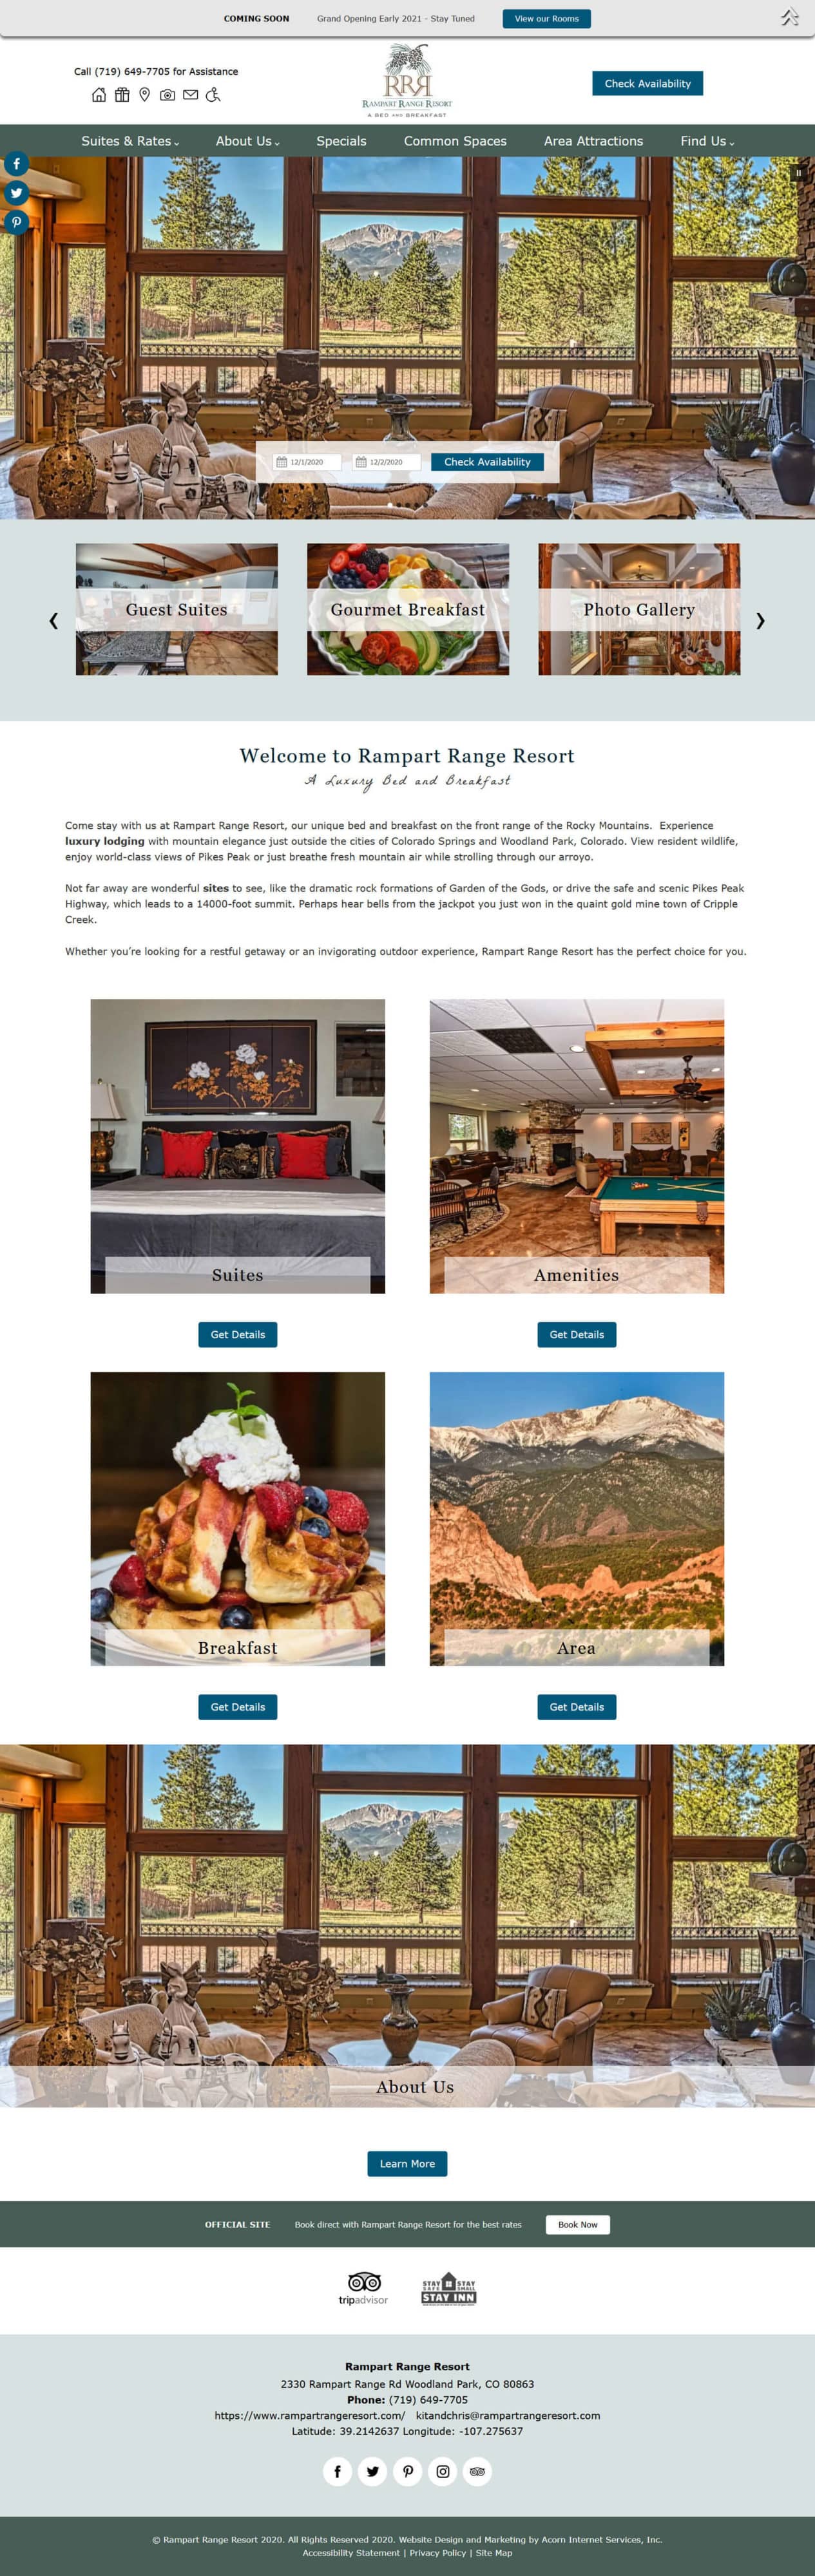 Rampart Range Resort's new home page in a screenshot